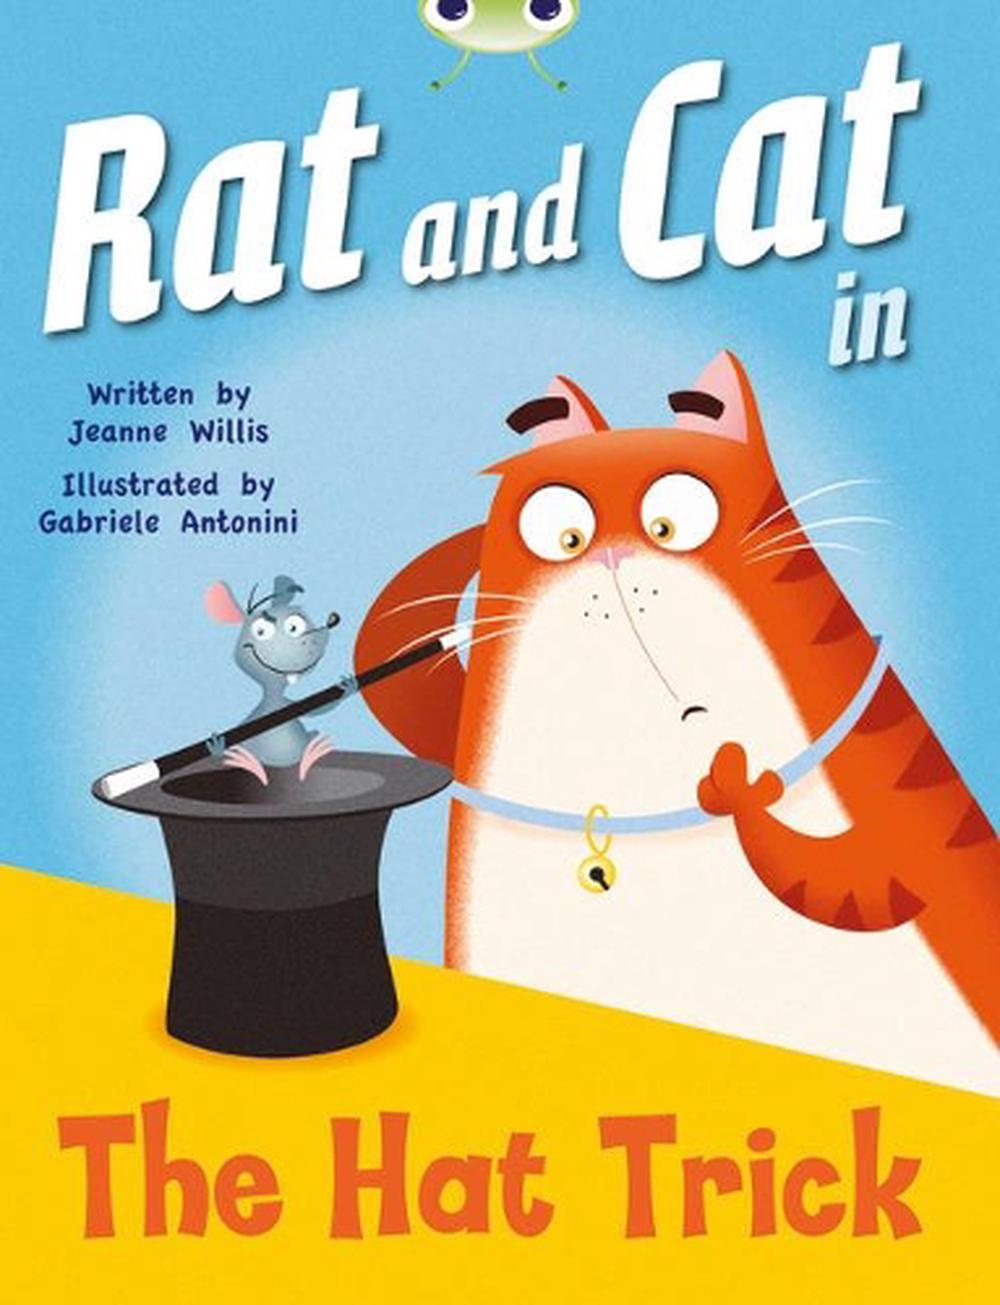 Bug Club Red a (ks1) Rat and Cat in the Hat Trick 6-pack by Jeanne ...